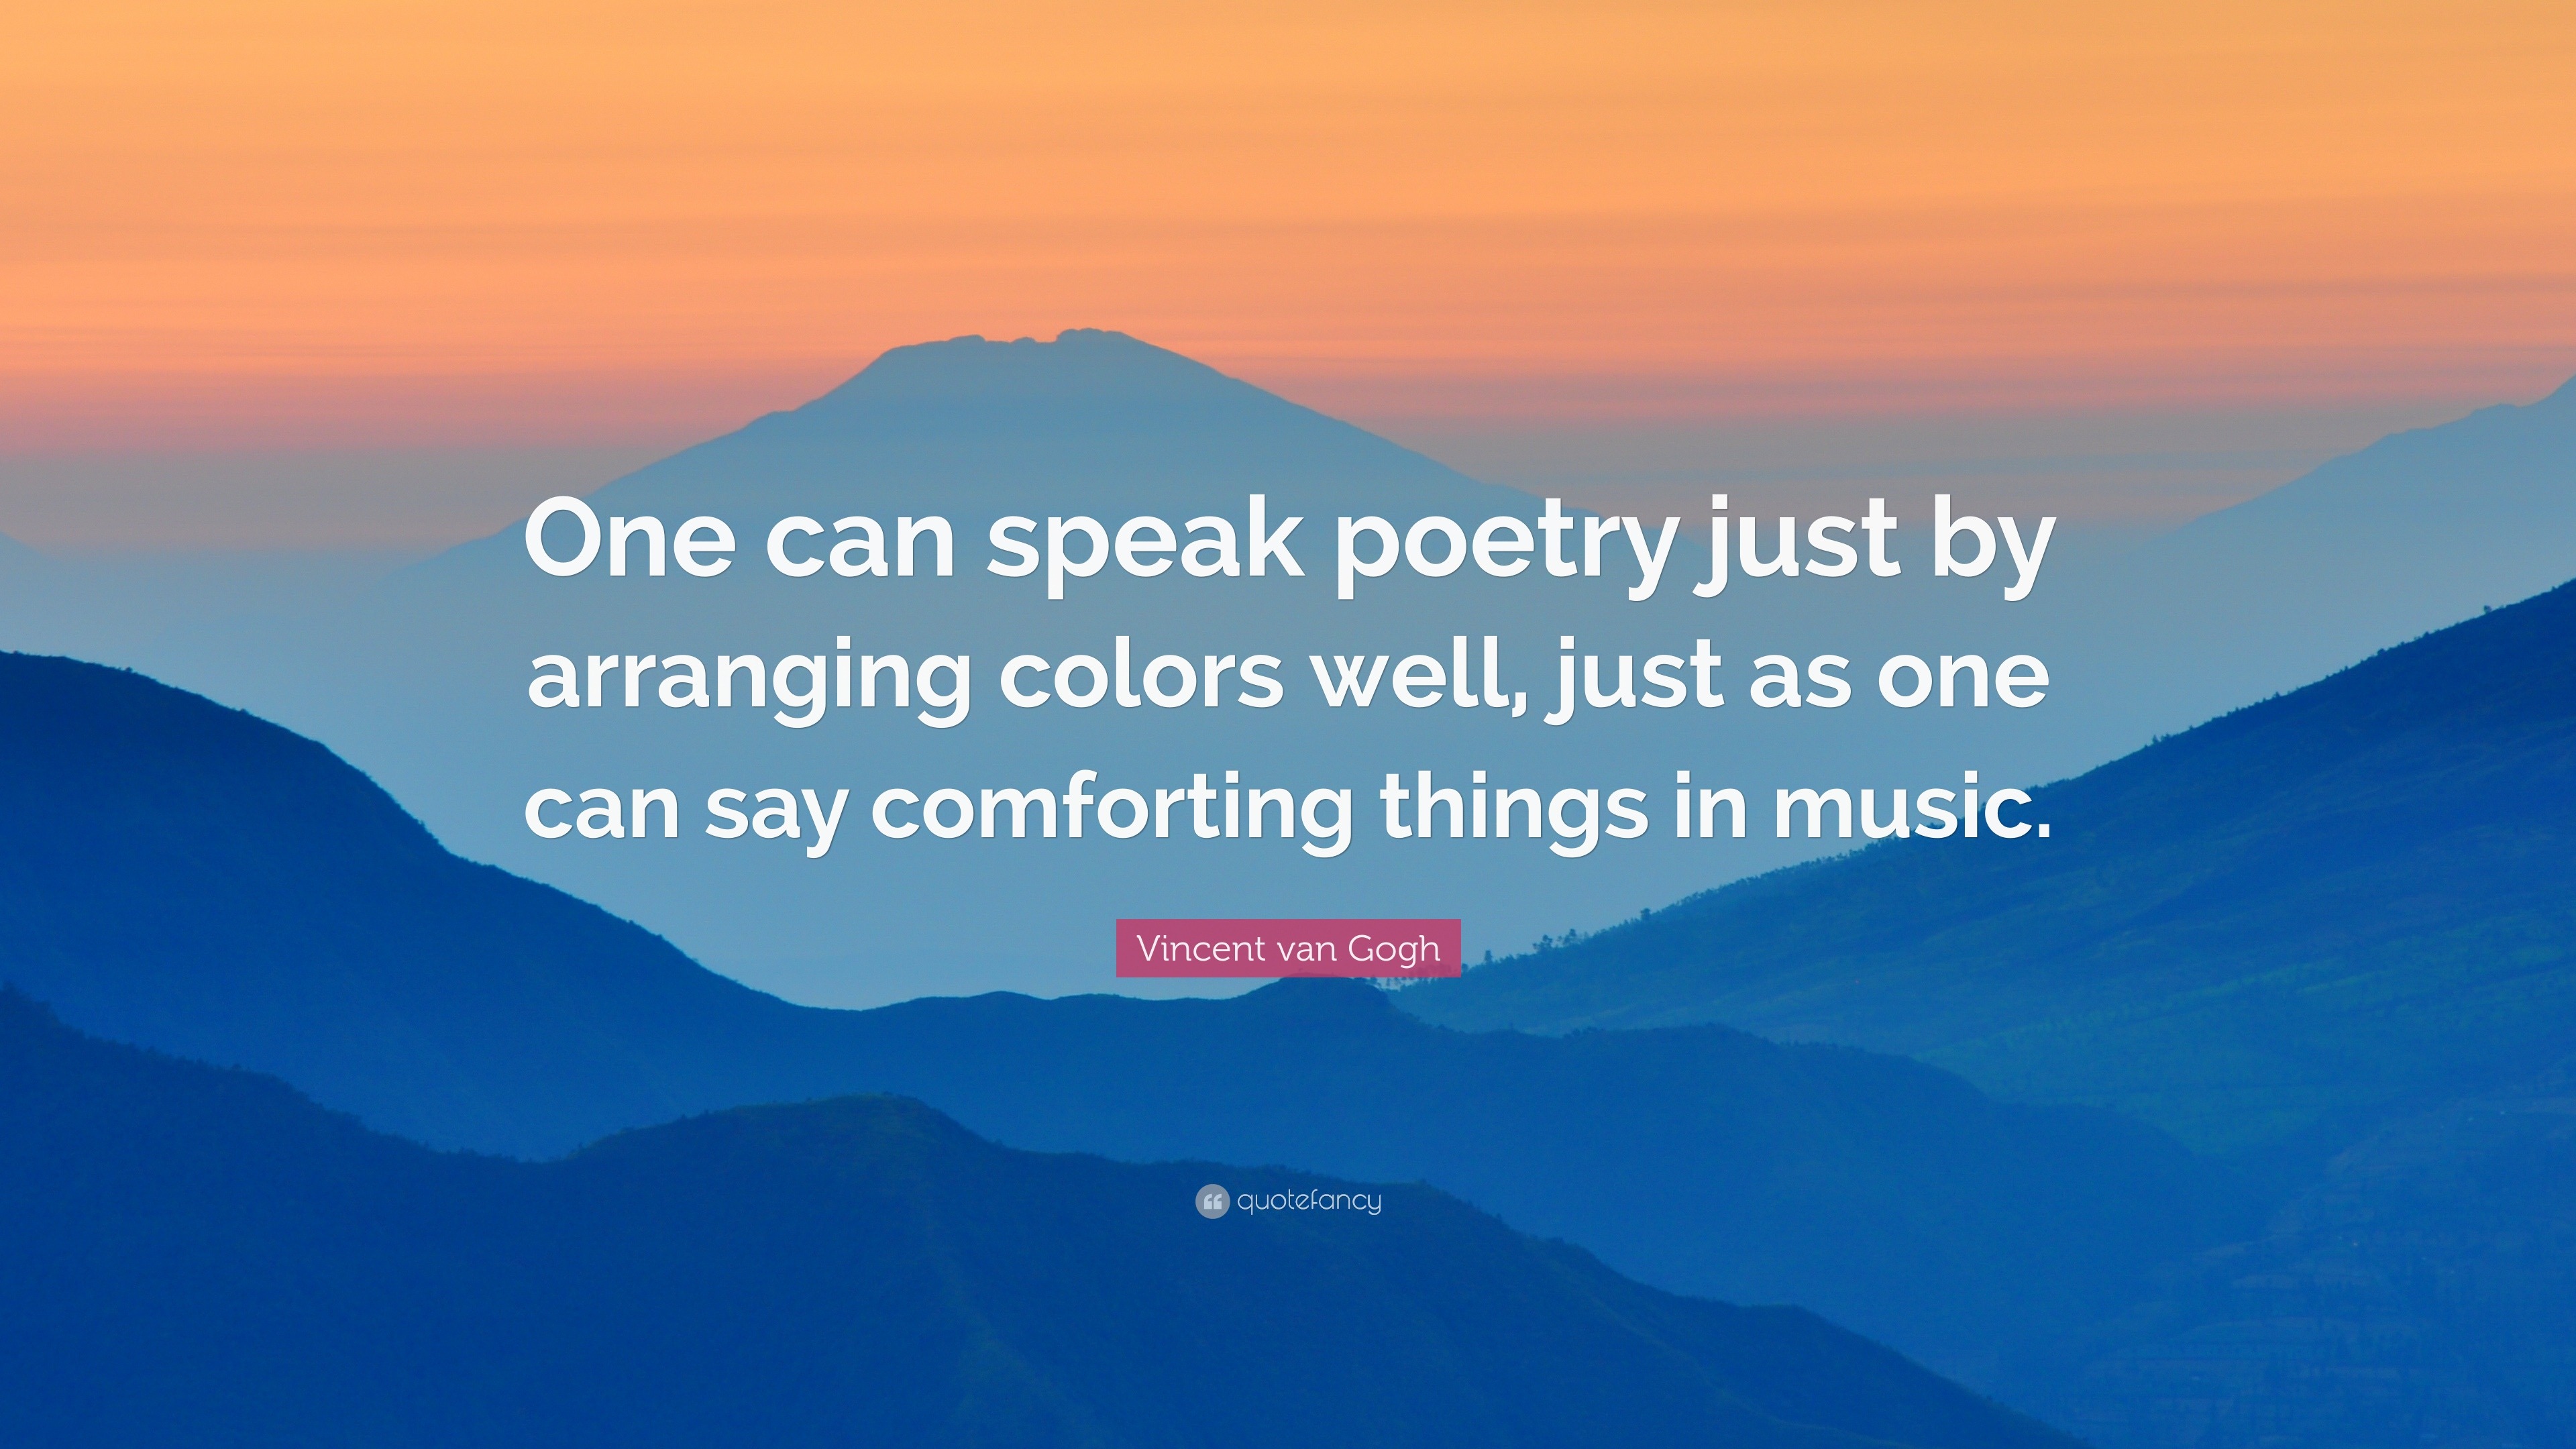 Vincent van Gogh Quote: “One can speak poetry just by arranging colors